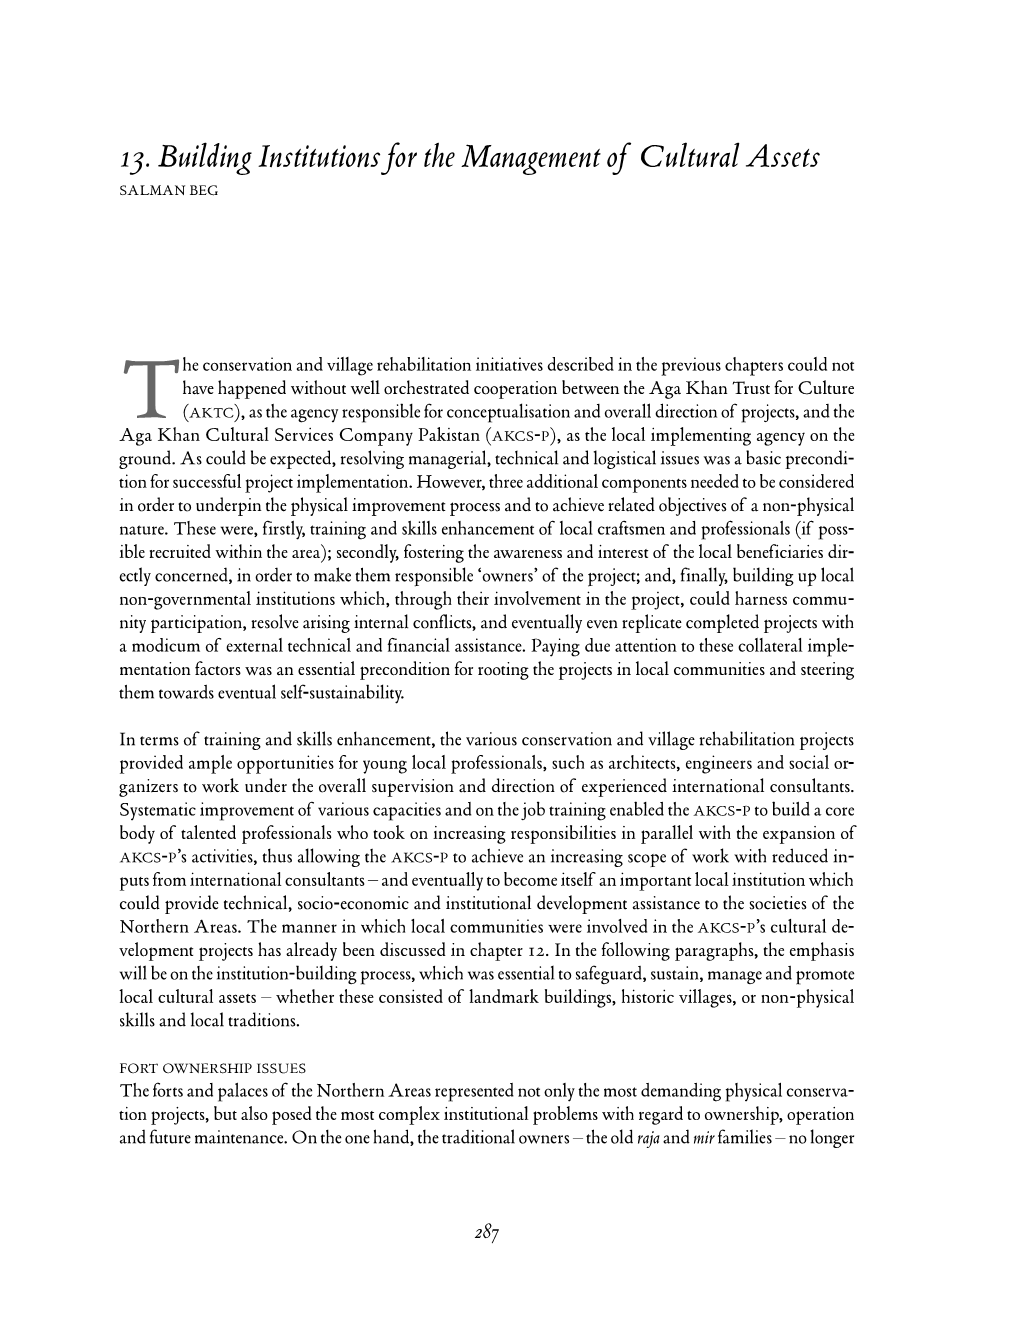 Building Institutions for the Management of Cultural Assets